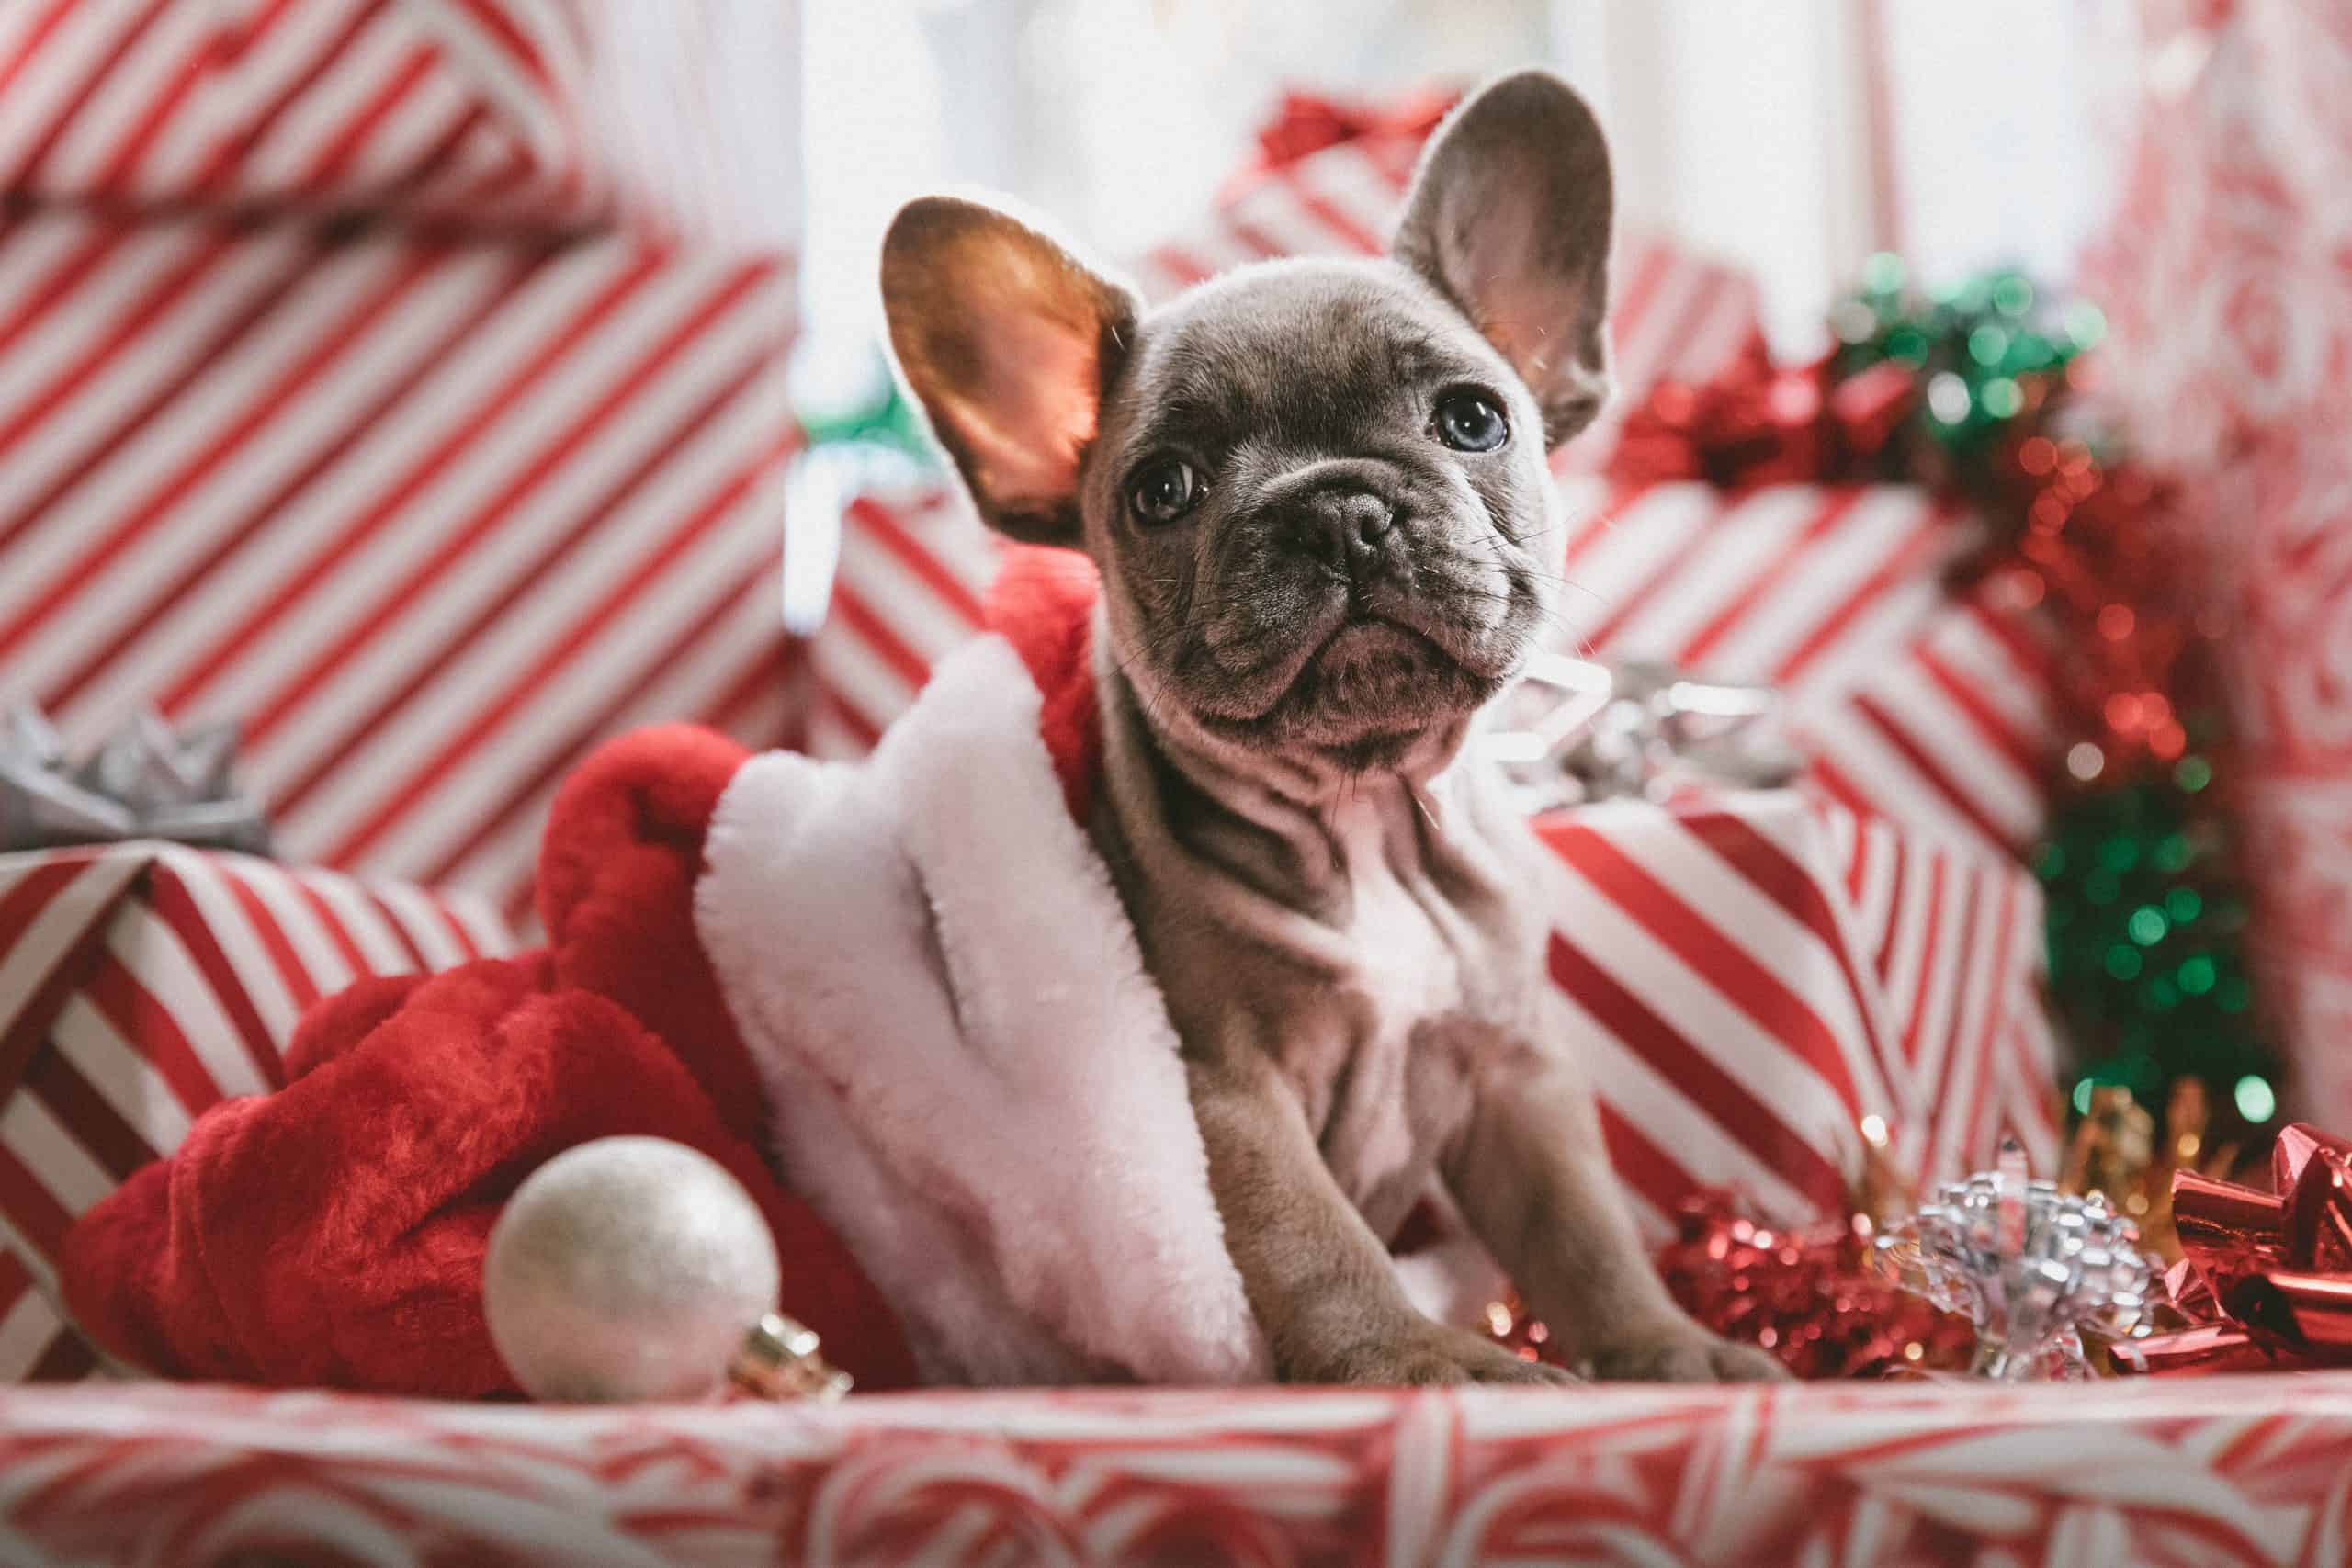 https://149648348.v2.pressablecdn.com/wp-content/uploads/2021/12/Best-Christmas-Gifts-For-Your-Pups-and-any-Dog-Lovers-in-Your-Life-scaled.jpg